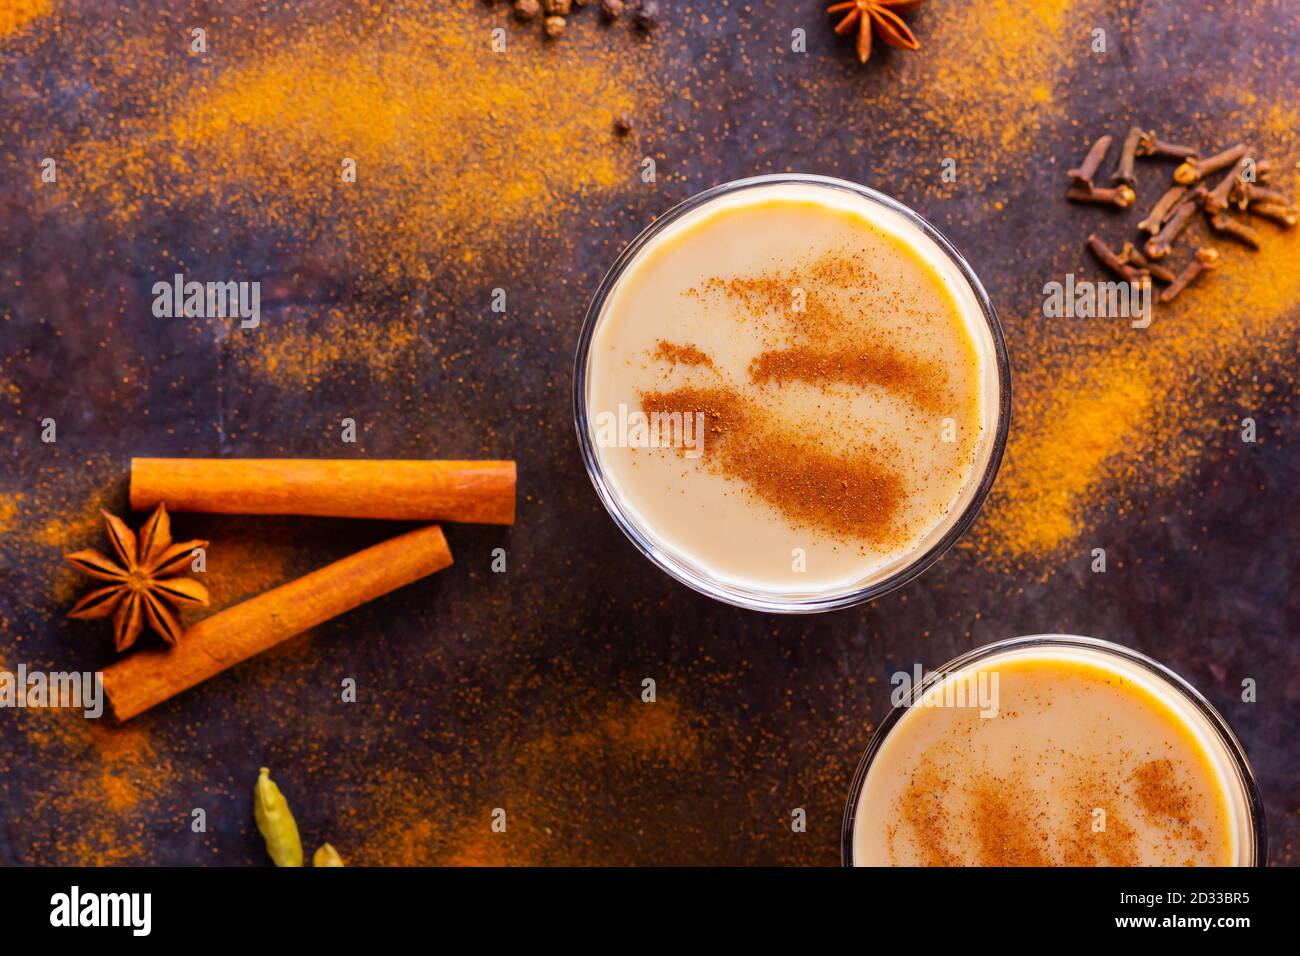 Masala chai tea on a black background. Two transparent glasses of ...